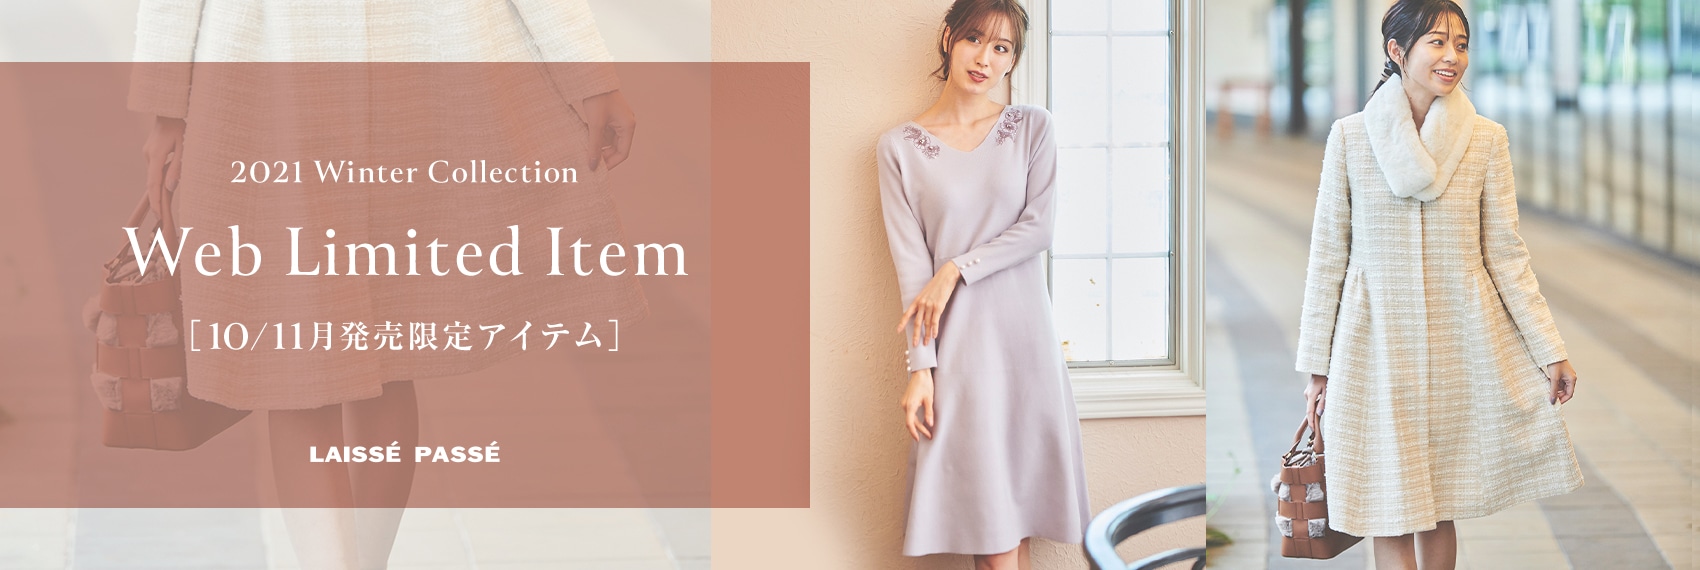 2021 Winter Collection Web Limited Item 10/11月発売限定アイテム